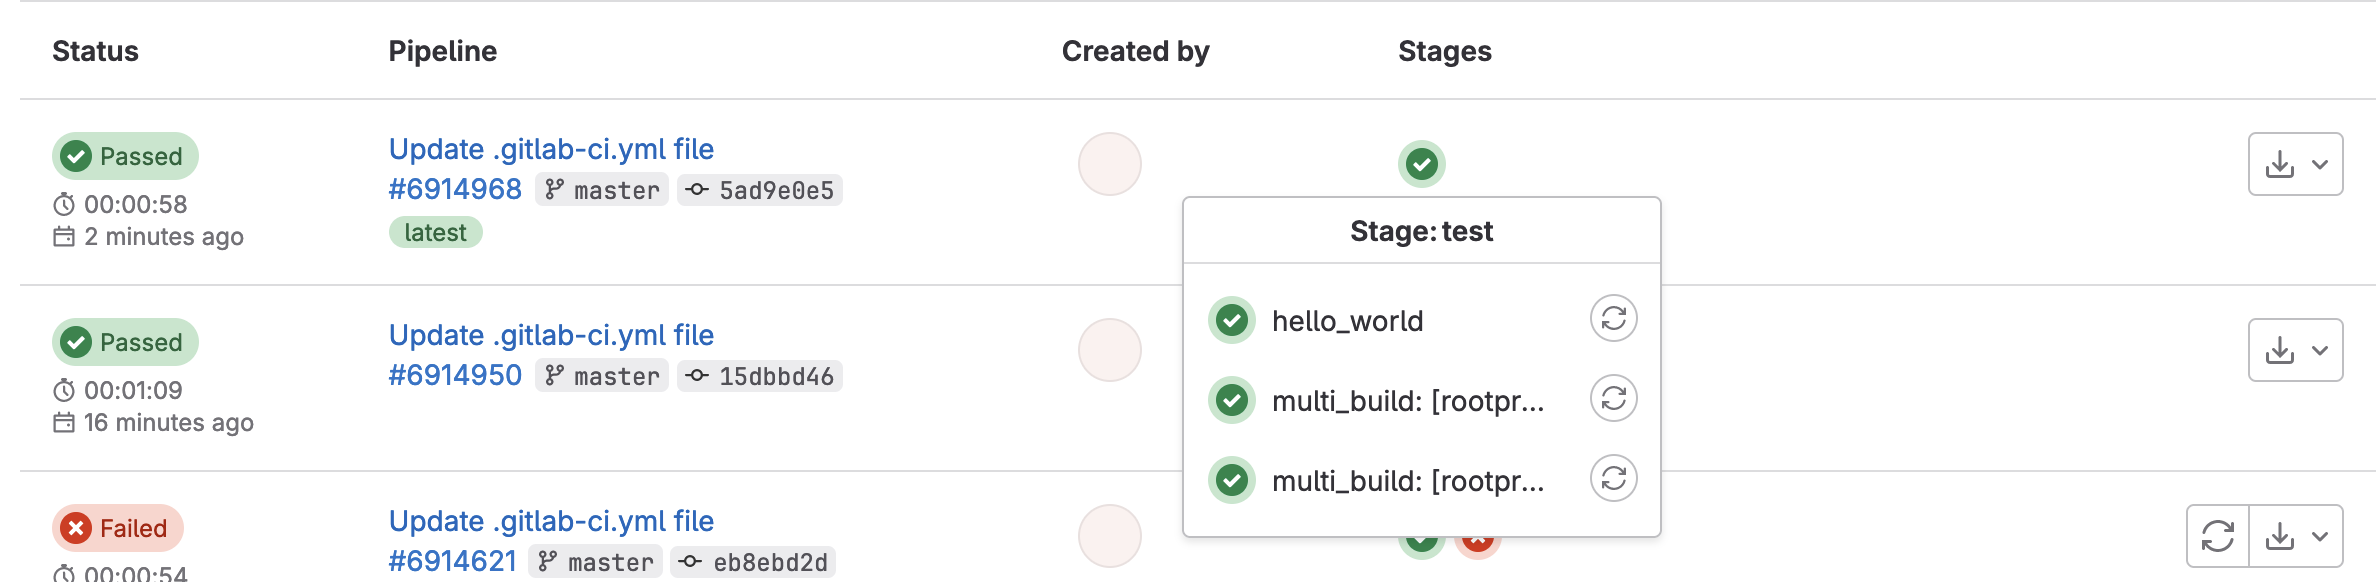 CI/CD Default Stages in Pipeline